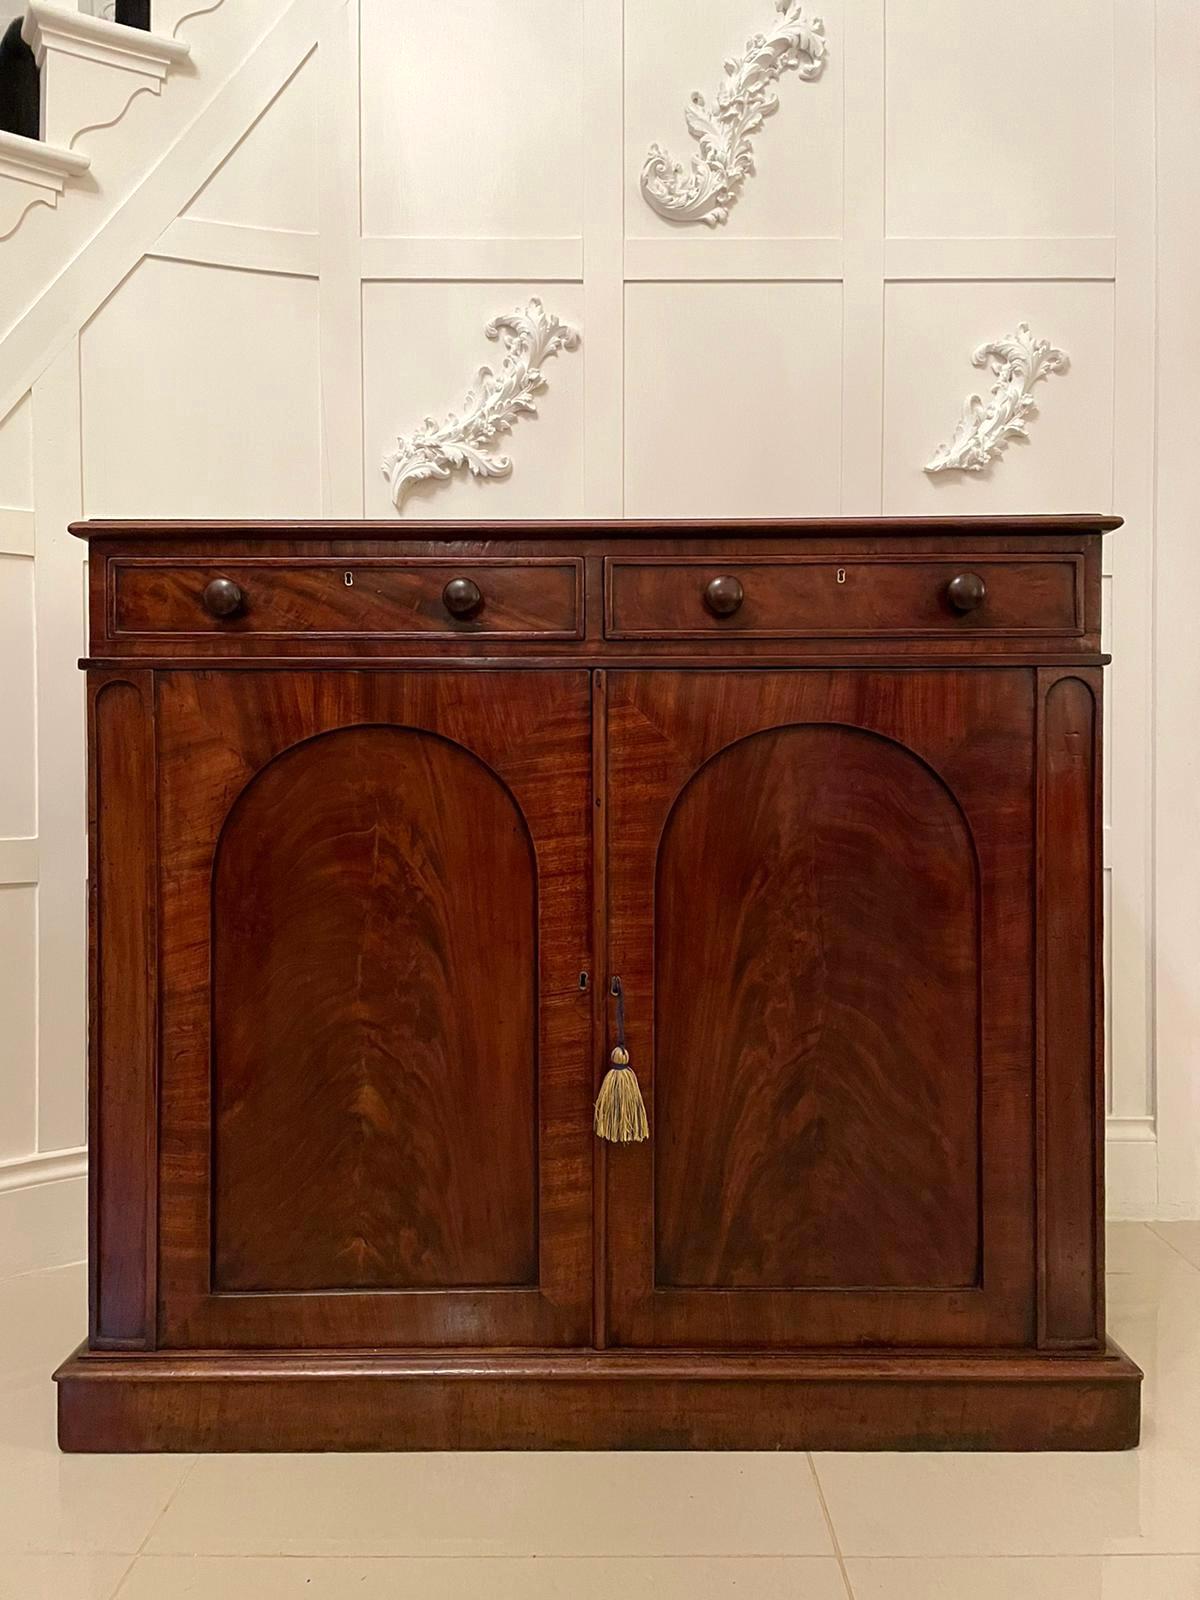 19th century Victorian antique mahogany side cabinet having a very attractive mahogany top with a moulded edge, two figured mahogany drawers with the original mahogany turned knobs, two figured mahogany doors with pretty arched panels which open